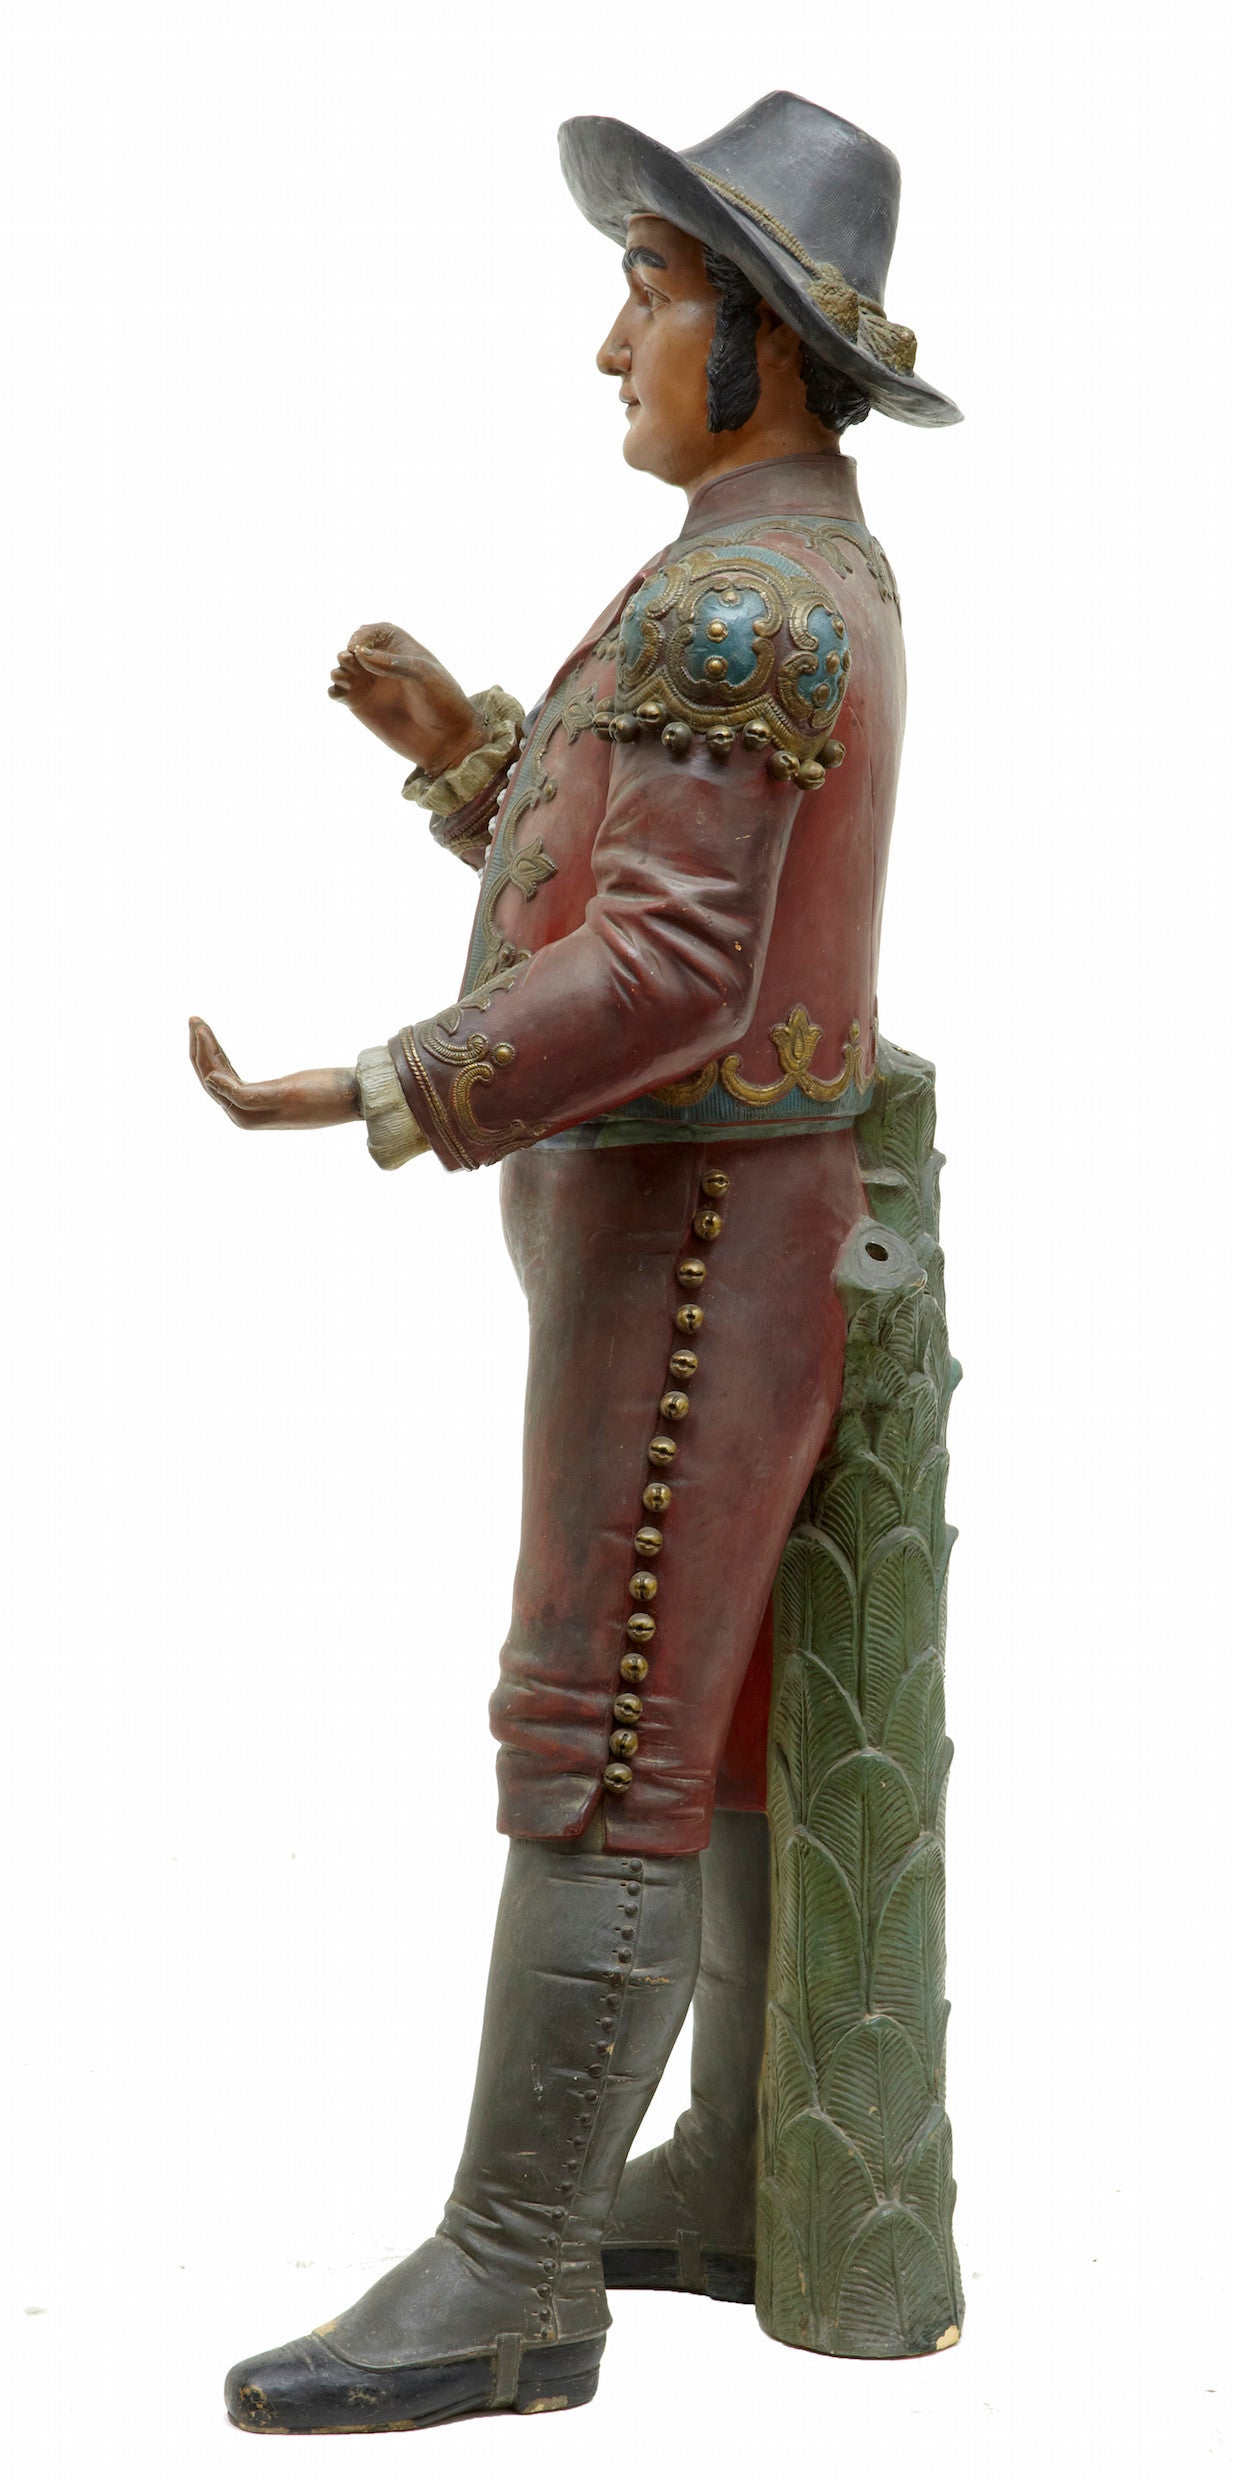 Unusual 19th century Spanish terracotta planter in the form of a figure

Rare and unusual Spanish figure, circa 1890.

Hand-painted and wearing Spanish costume. Figure supported by a cast palm tree base with three deep holes, for holding